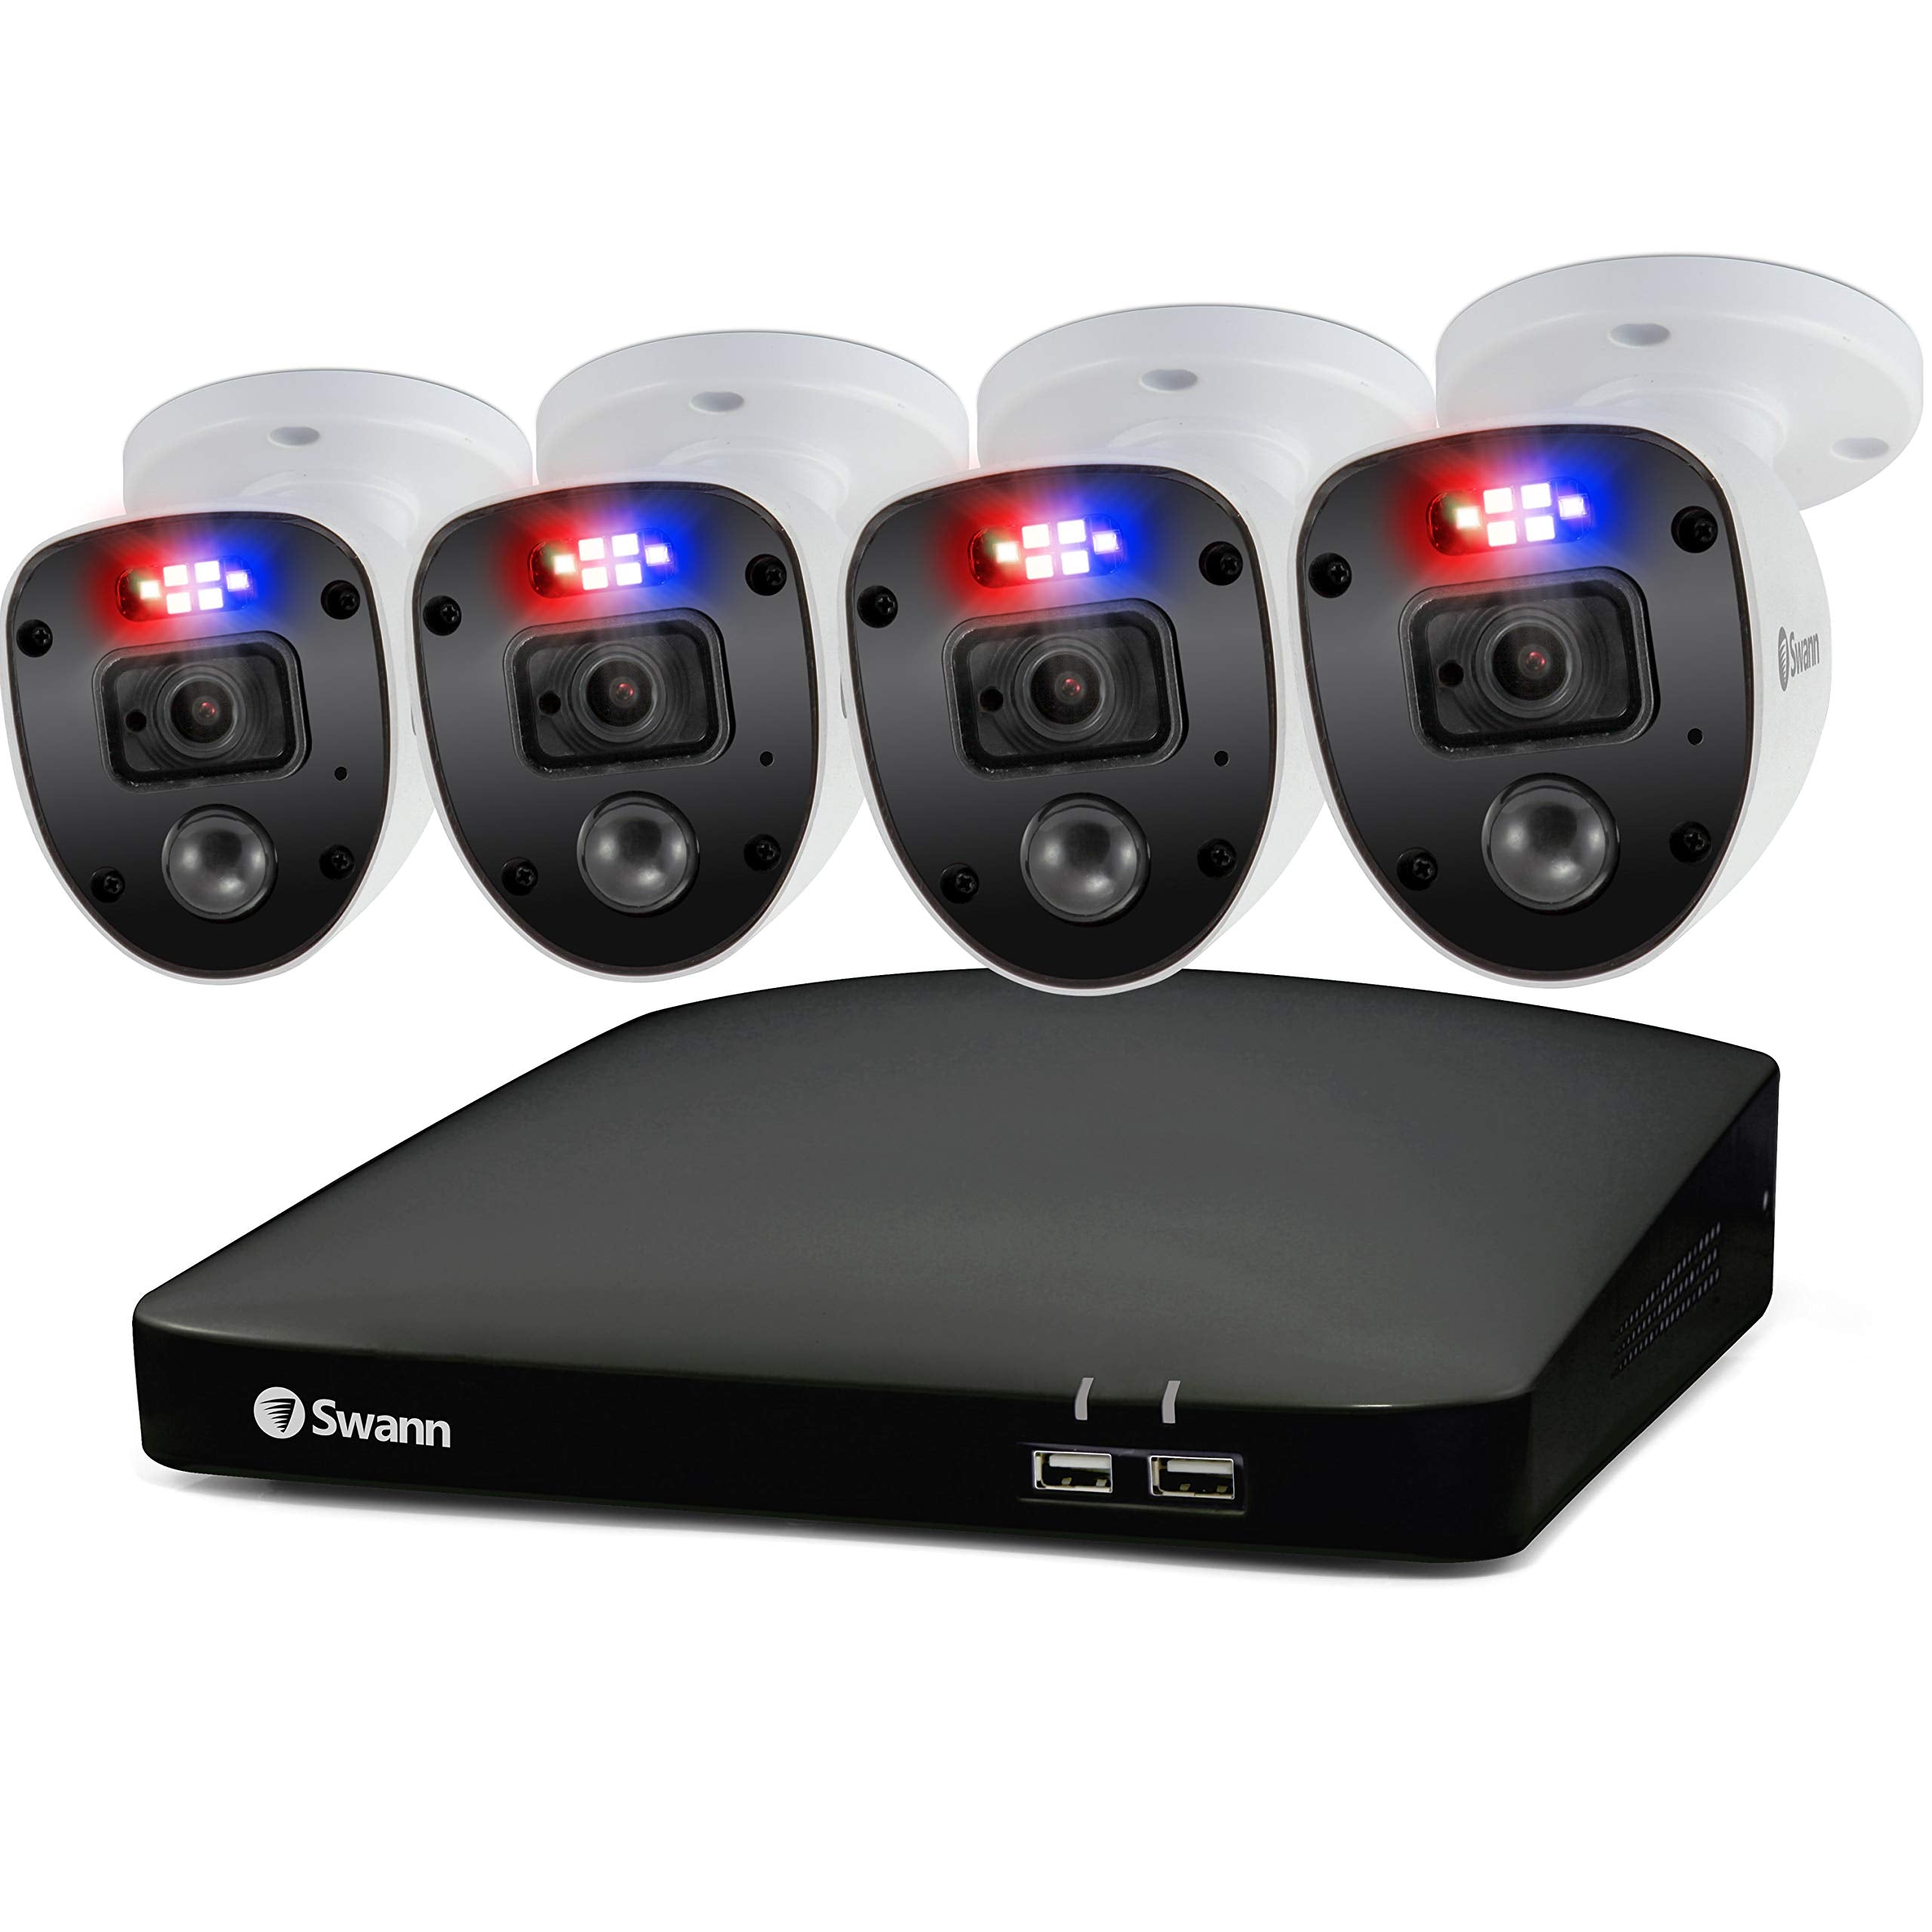 Swann Security CCTV Kit, 8 Channel 1080p Full HD 1TB HDD DVR-4680 with 4 x PRO-1080SL Enforcer Bullet Analogue CCTV Cameras - Works with Google Assistant and Alexa